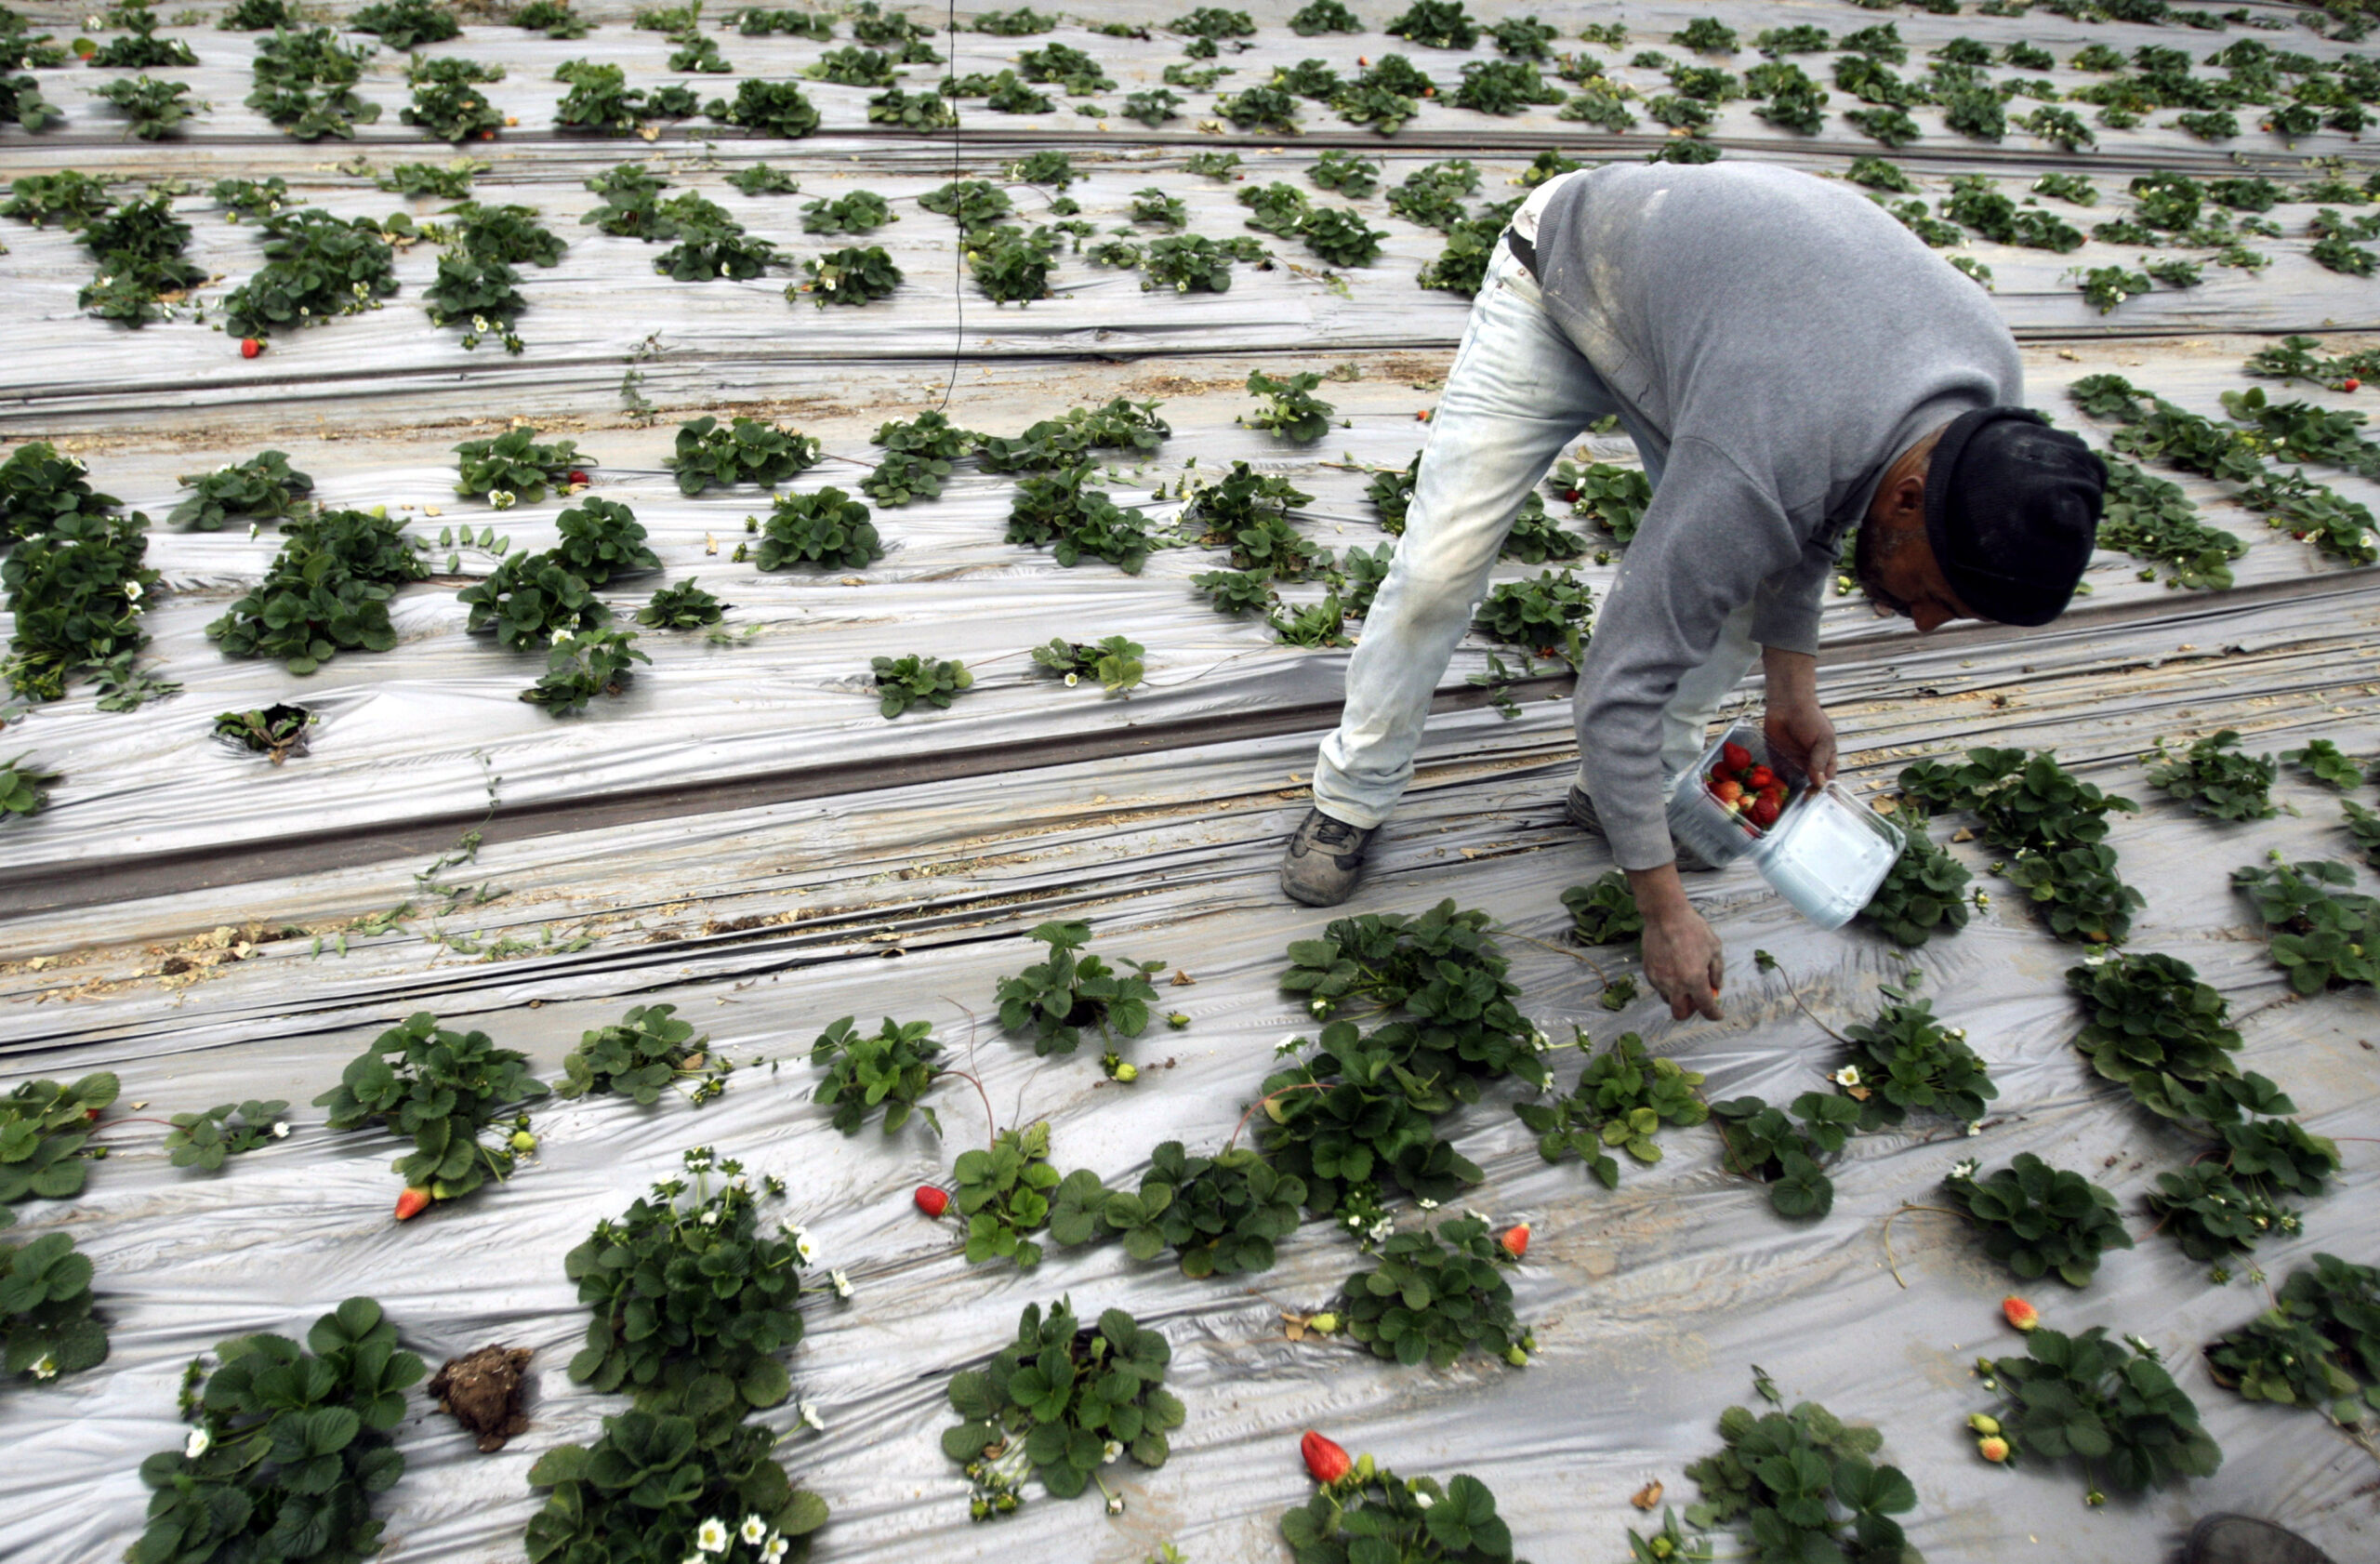 A man picks up strawberries in a greenhouse